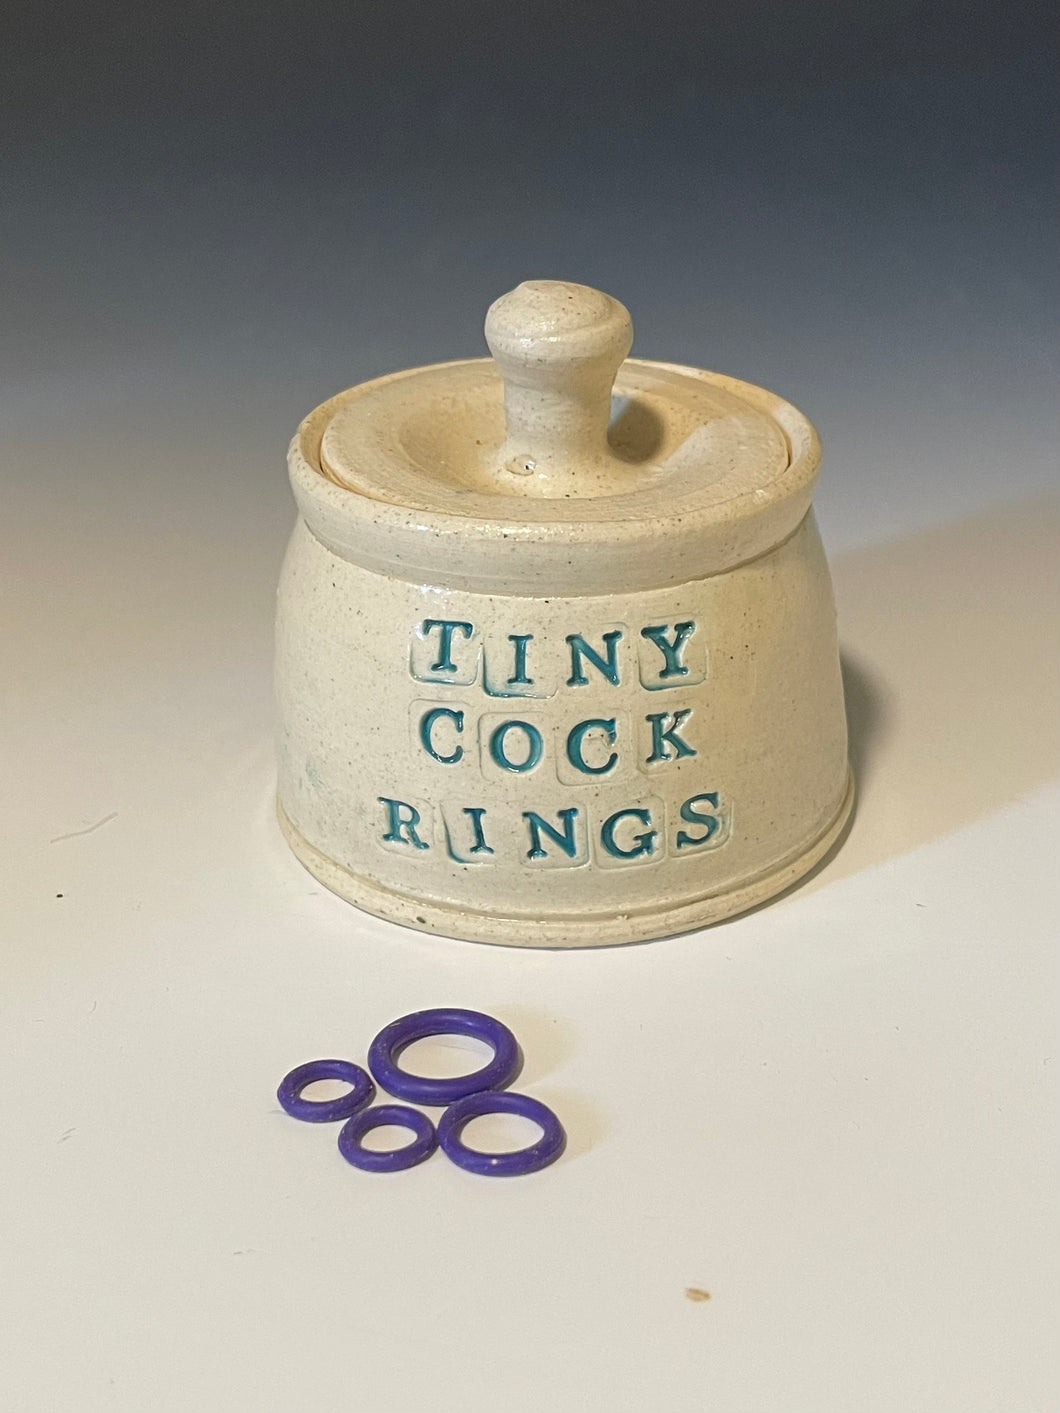 Tiny Cock Rings Jar for your tiny cock rings